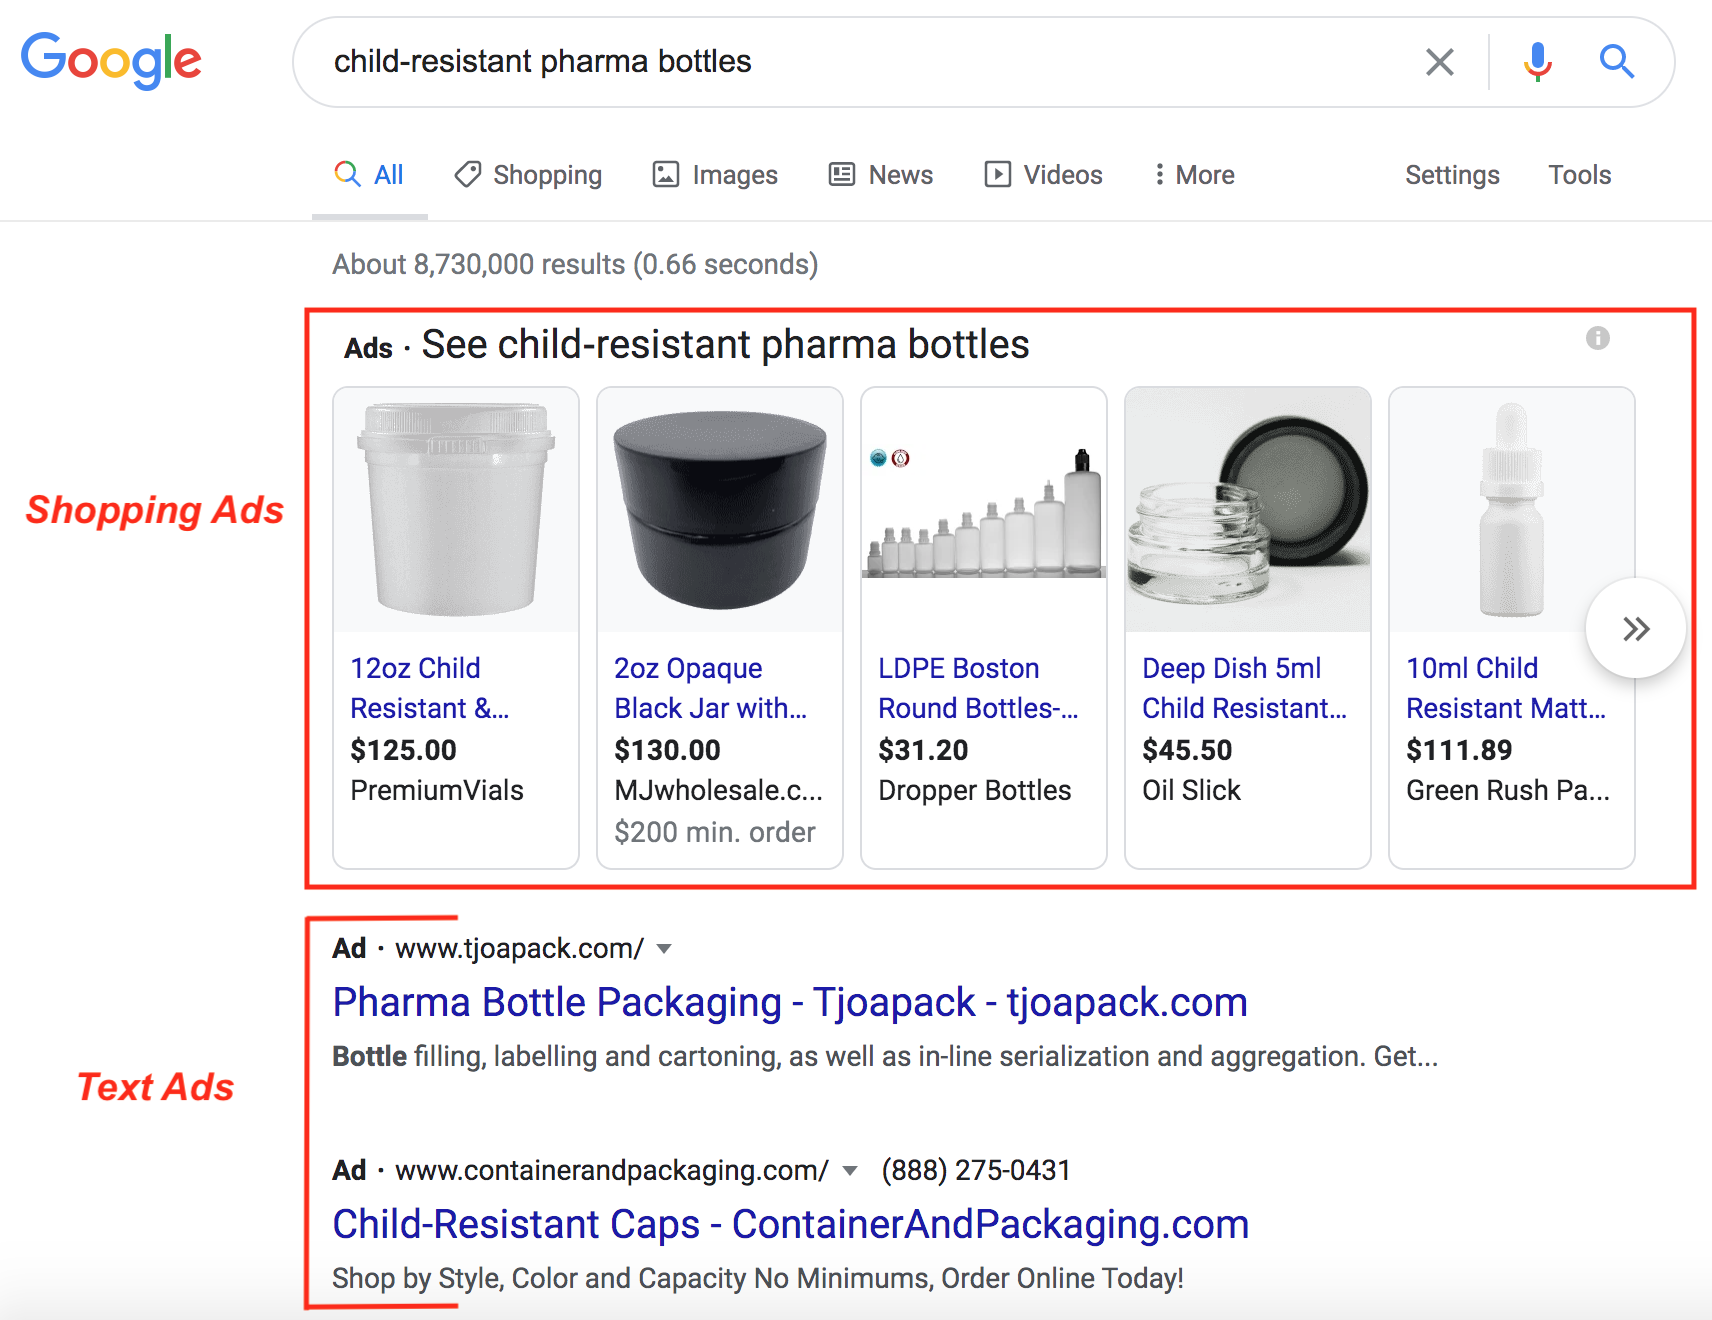 An example of Google Shopping Ads and Text Ads